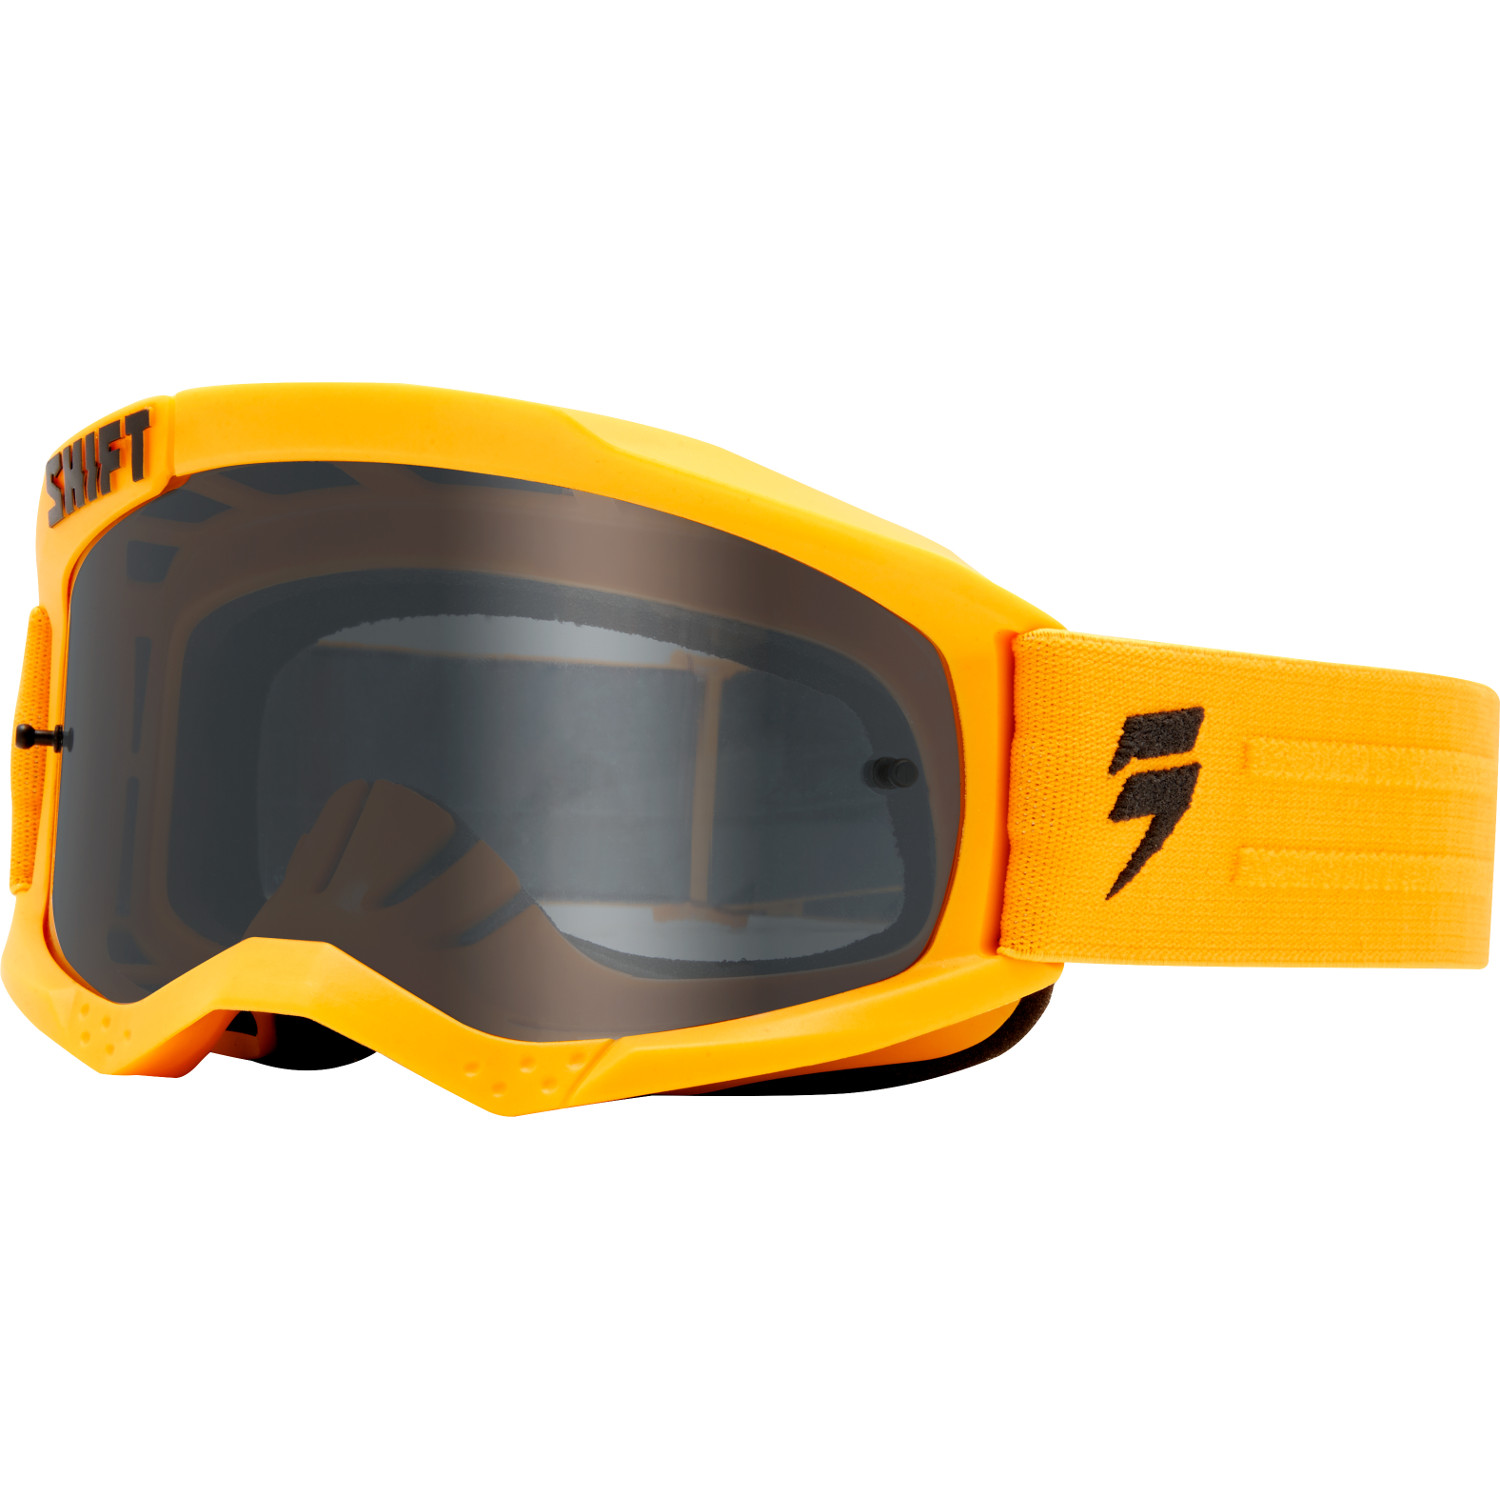 Shift Goggle Whit3 Label Yellow